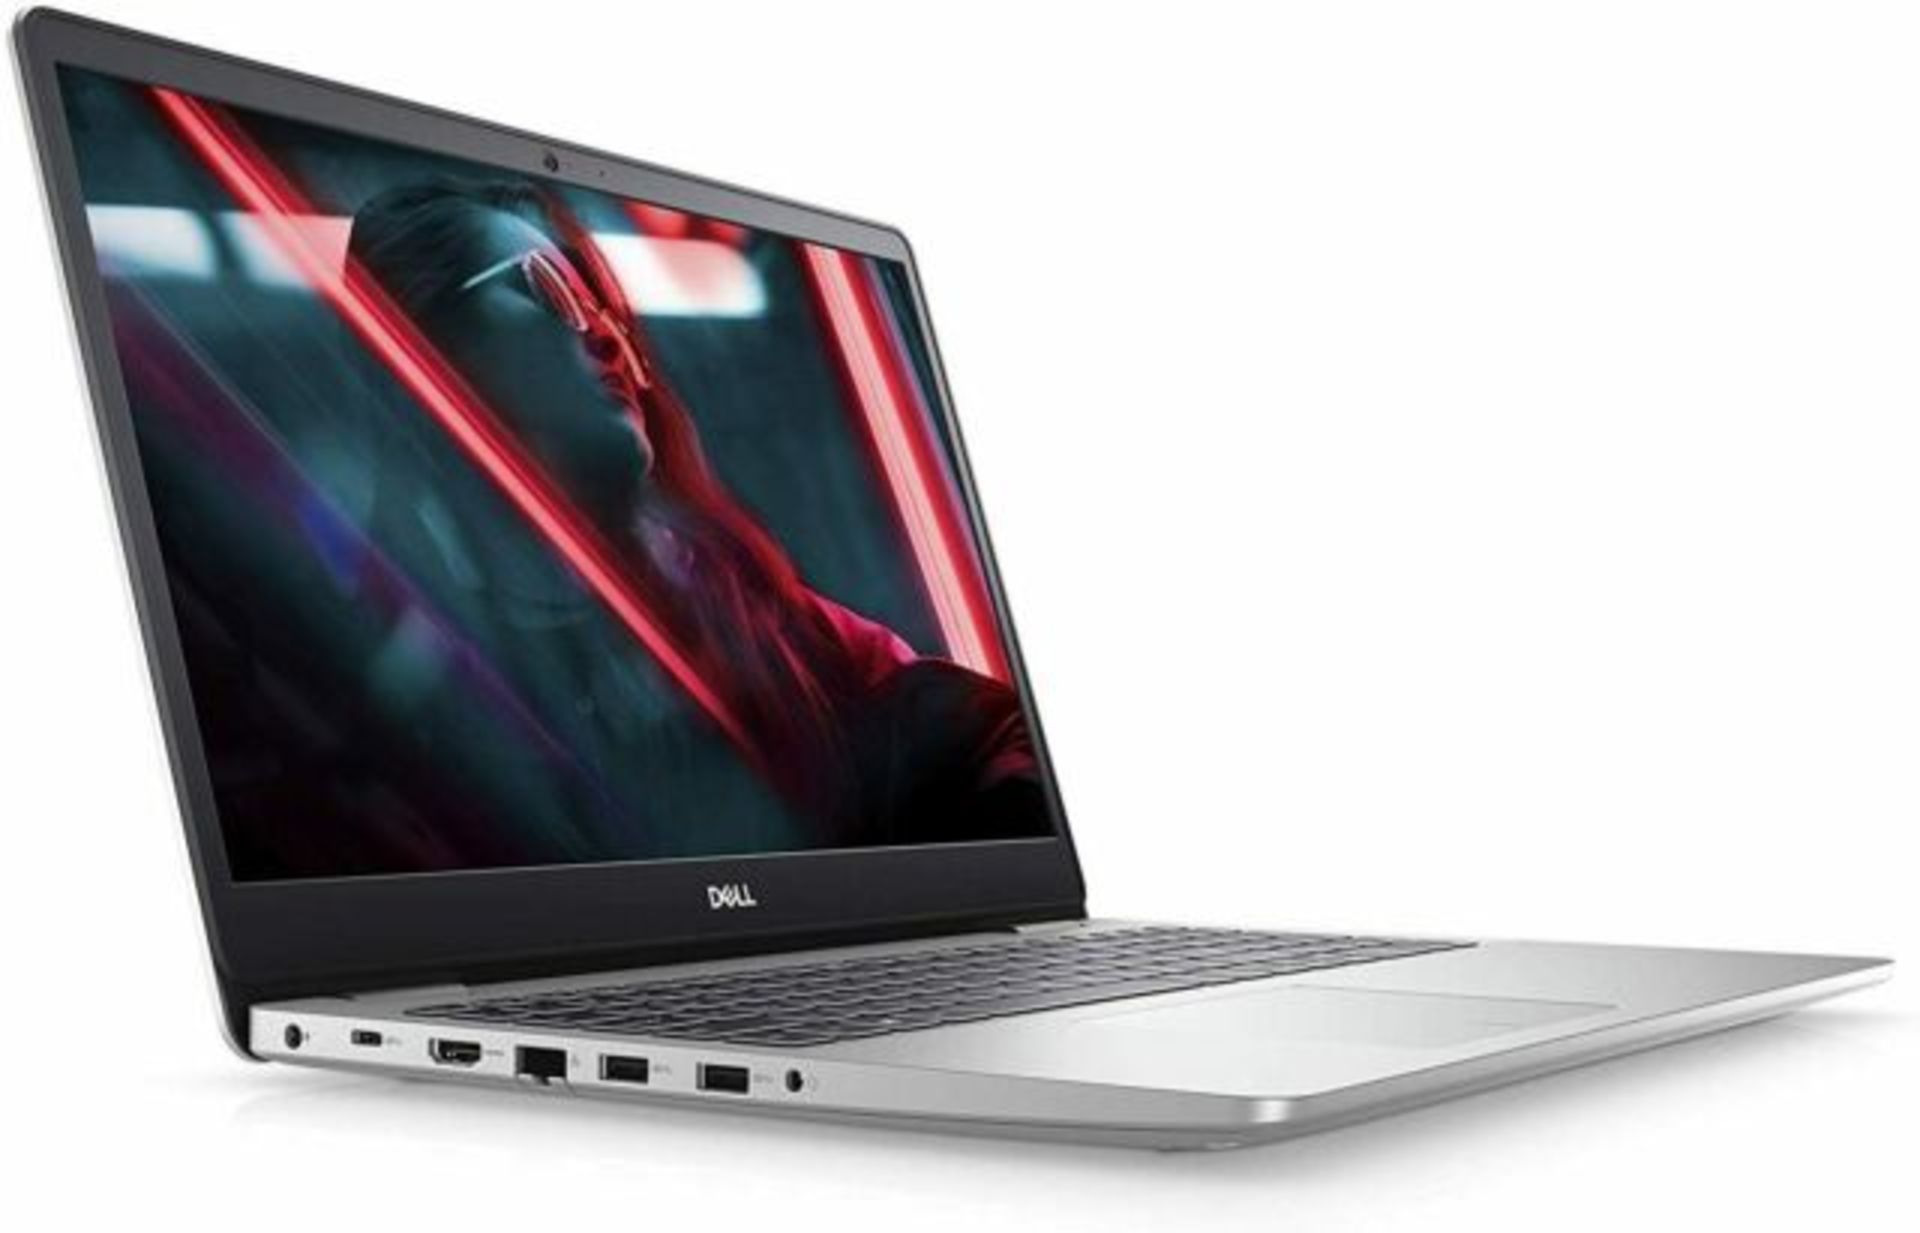 1 x Dell Inspiron 15 5593 Laptop Featuring a 10th Gen Core i5-1035G1 3.6ghz Quad Core Processor, - Image 2 of 18